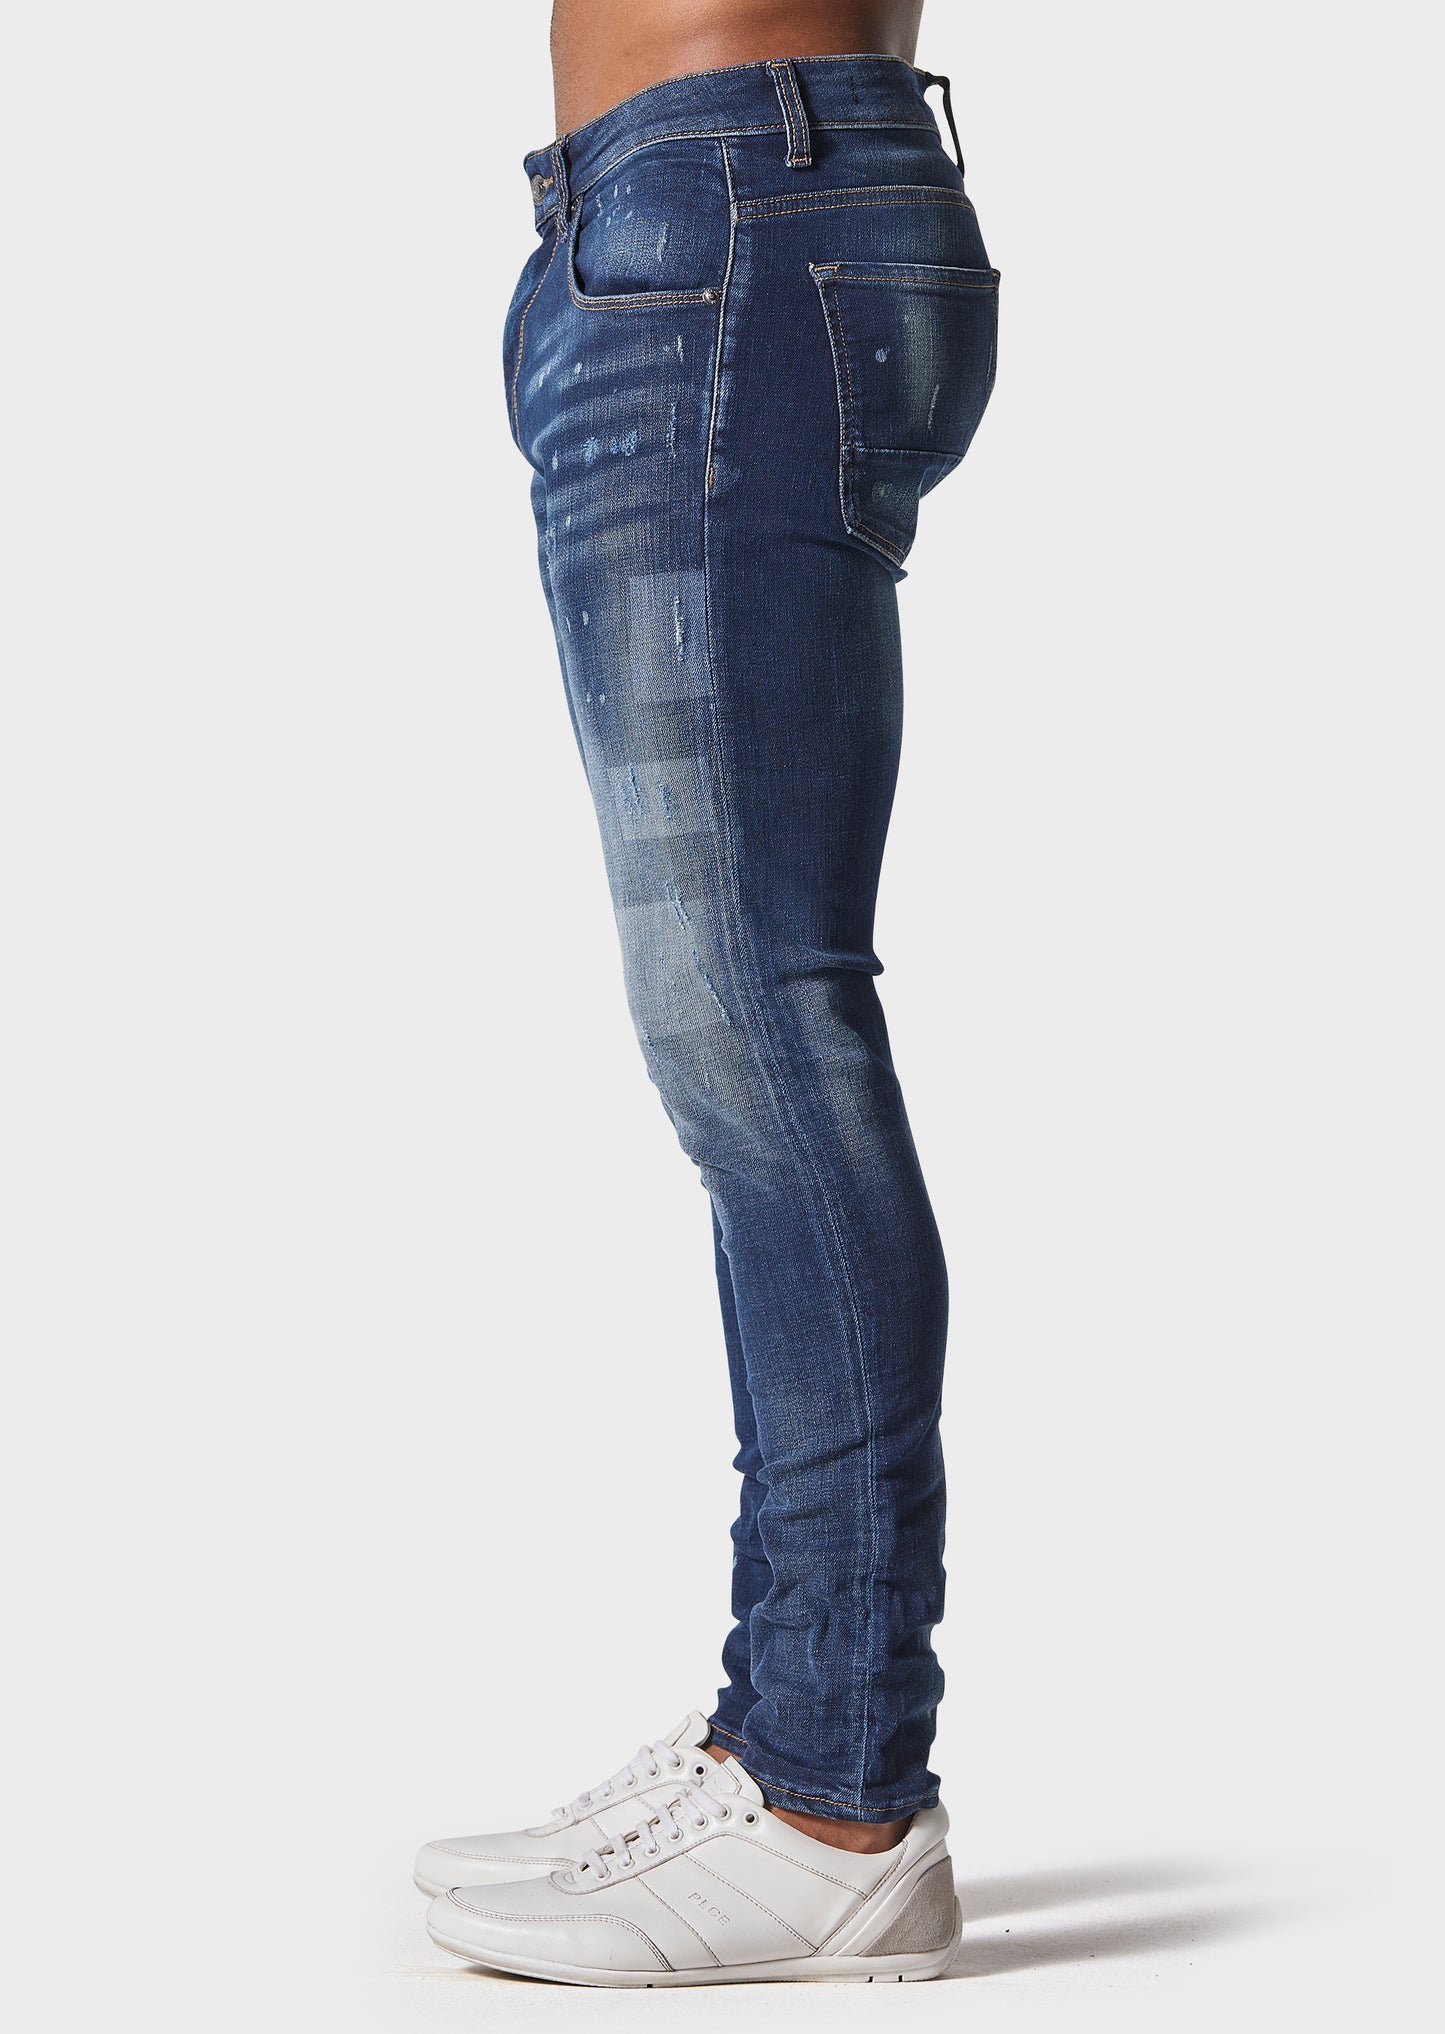 Moriarty COB 915 Slim Fit Jeans